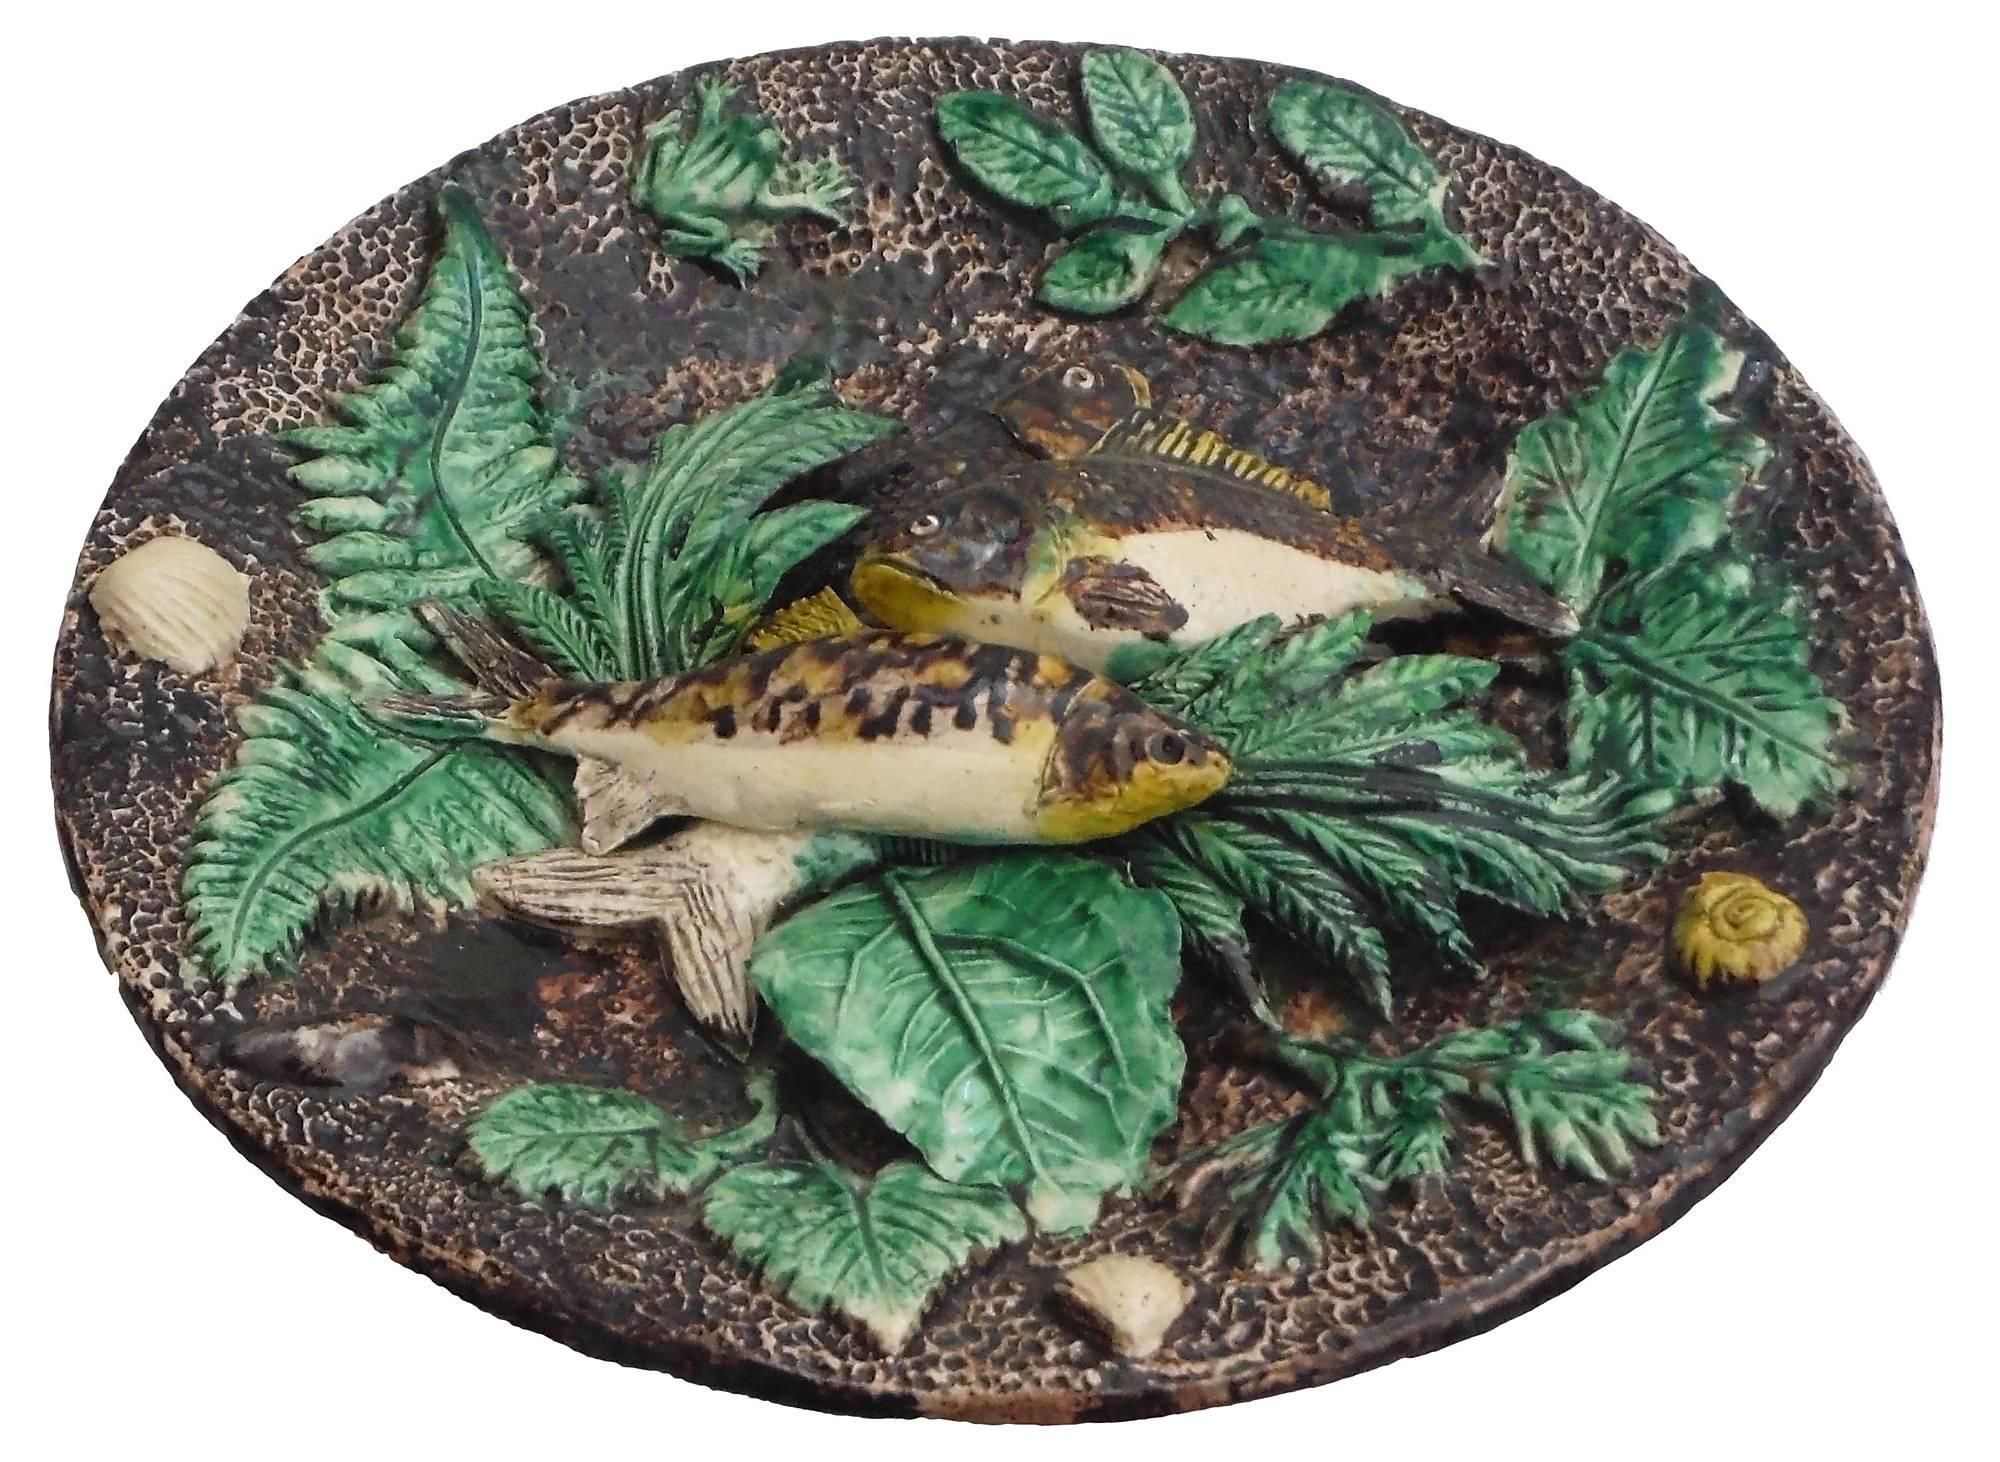 Antique French Majolica Palissy wall platter, circa 1880 with fish, frogs, shells, and green leaves, circa 1880.
Attributed to the ceramist Francois Maurice.
The school of Paris is composed by makers as Victor Barbizet, Francois Maurice, Thomas